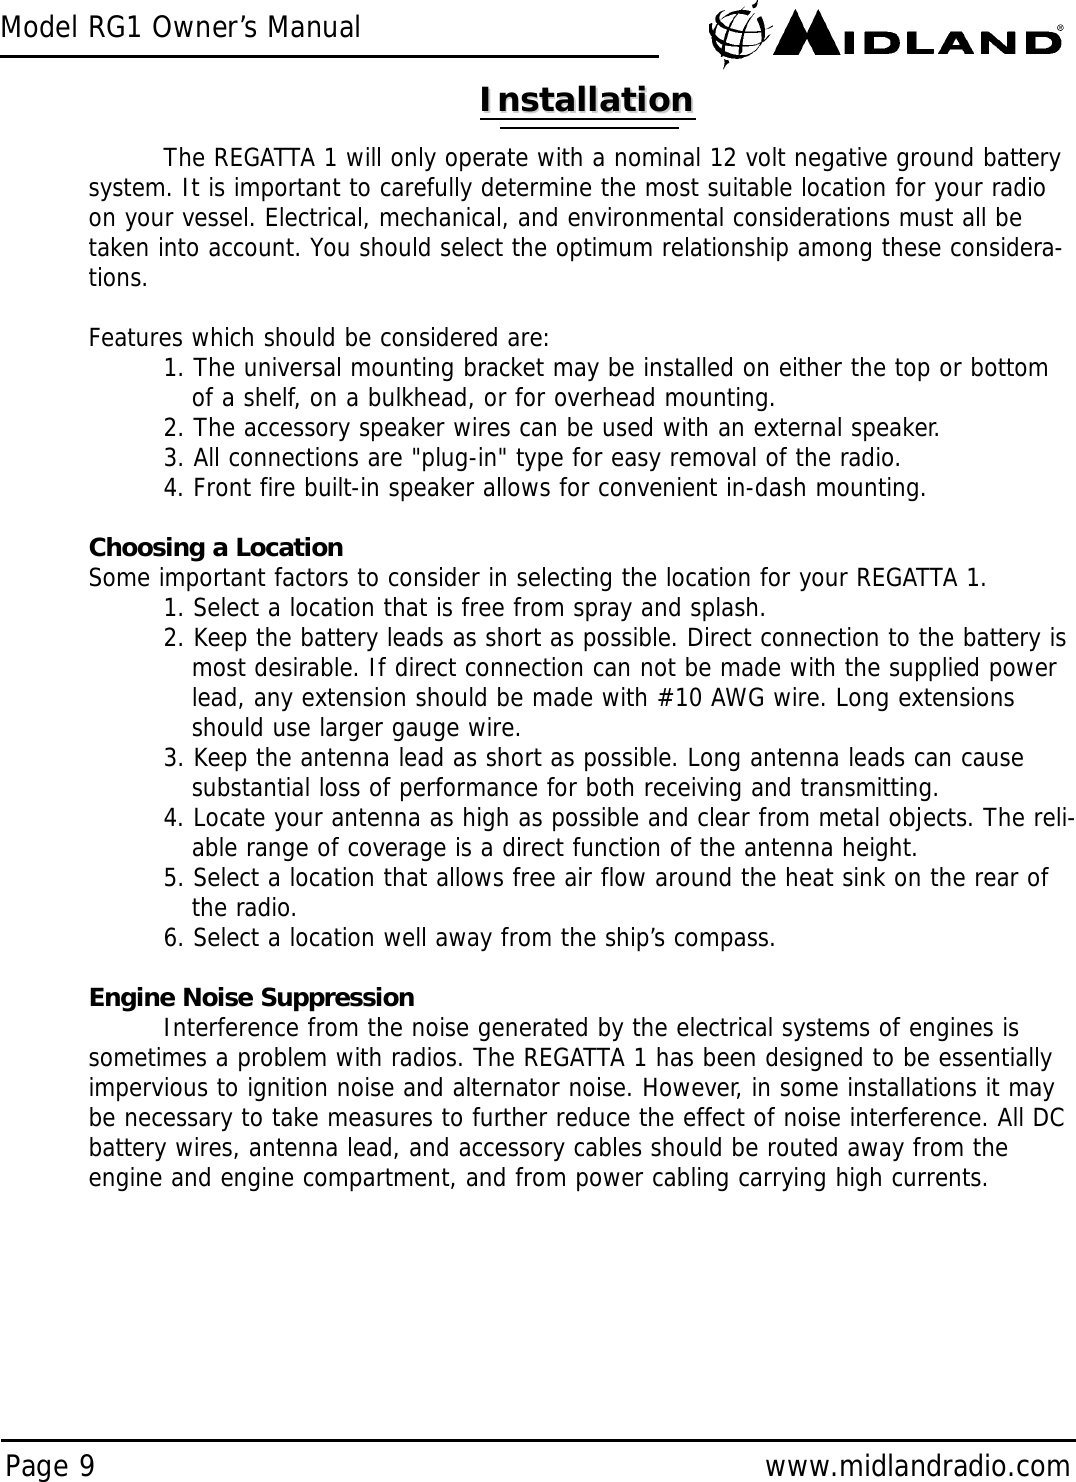 Model RG1 Owner’s ManualPage 9 www.midlandradio.comInstallationInstallationThe REGATTA 1 will only operate with a nominal 12 volt negative ground batterysystem. It is important to carefully determine the most suitable location for your radioon your vessel. Electrical, mechanical, and environmental considerations must all betaken into account. You should select the optimum relationship among these considera-tions.Features which should be considered are:1. The universal mounting bracket may be installed on either the top or bottom of a shelf, on a bulkhead, or for overhead mounting.2. The accessory speaker wires can be used with an external speaker.3. All connections are &quot;plug-in&quot; type for easy removal of the radio.4. Front fire built-in speaker allows for convenient in-dash mounting.Choosing a LocationSome important factors to consider in selecting the location for your REGATTA 1.1. Select a location that is free from spray and splash.2. Keep the battery leads as short as possible. Direct connection to the battery is most desirable. If direct connection can not be made with the supplied power lead, any extension should be made with #10 AWG wire. Long extensions should use larger gauge wire.3. Keep the antenna lead as short as possible. Long antenna leads can cause substantial loss of performance for both receiving and transmitting.4. Locate your antenna as high as possible and clear from metal objects. The reli-able range of coverage is a direct function of the antenna height.5. Select a location that allows free air flow around the heat sink on the rear of the radio.6. Select a location well away from the ship’s compass. Engine Noise SuppressionInterference from the noise generated by the electrical systems of engines issometimes a problem with radios. The REGATTA 1 has been designed to be essentiallyimpervious to ignition noise and alternator noise. However, in some installations it maybe necessary to take measures to further reduce the effect of noise interference. All DCbattery wires, antenna lead, and accessory cables should be routed away from theengine and engine compartment, and from power cabling carrying high currents.  